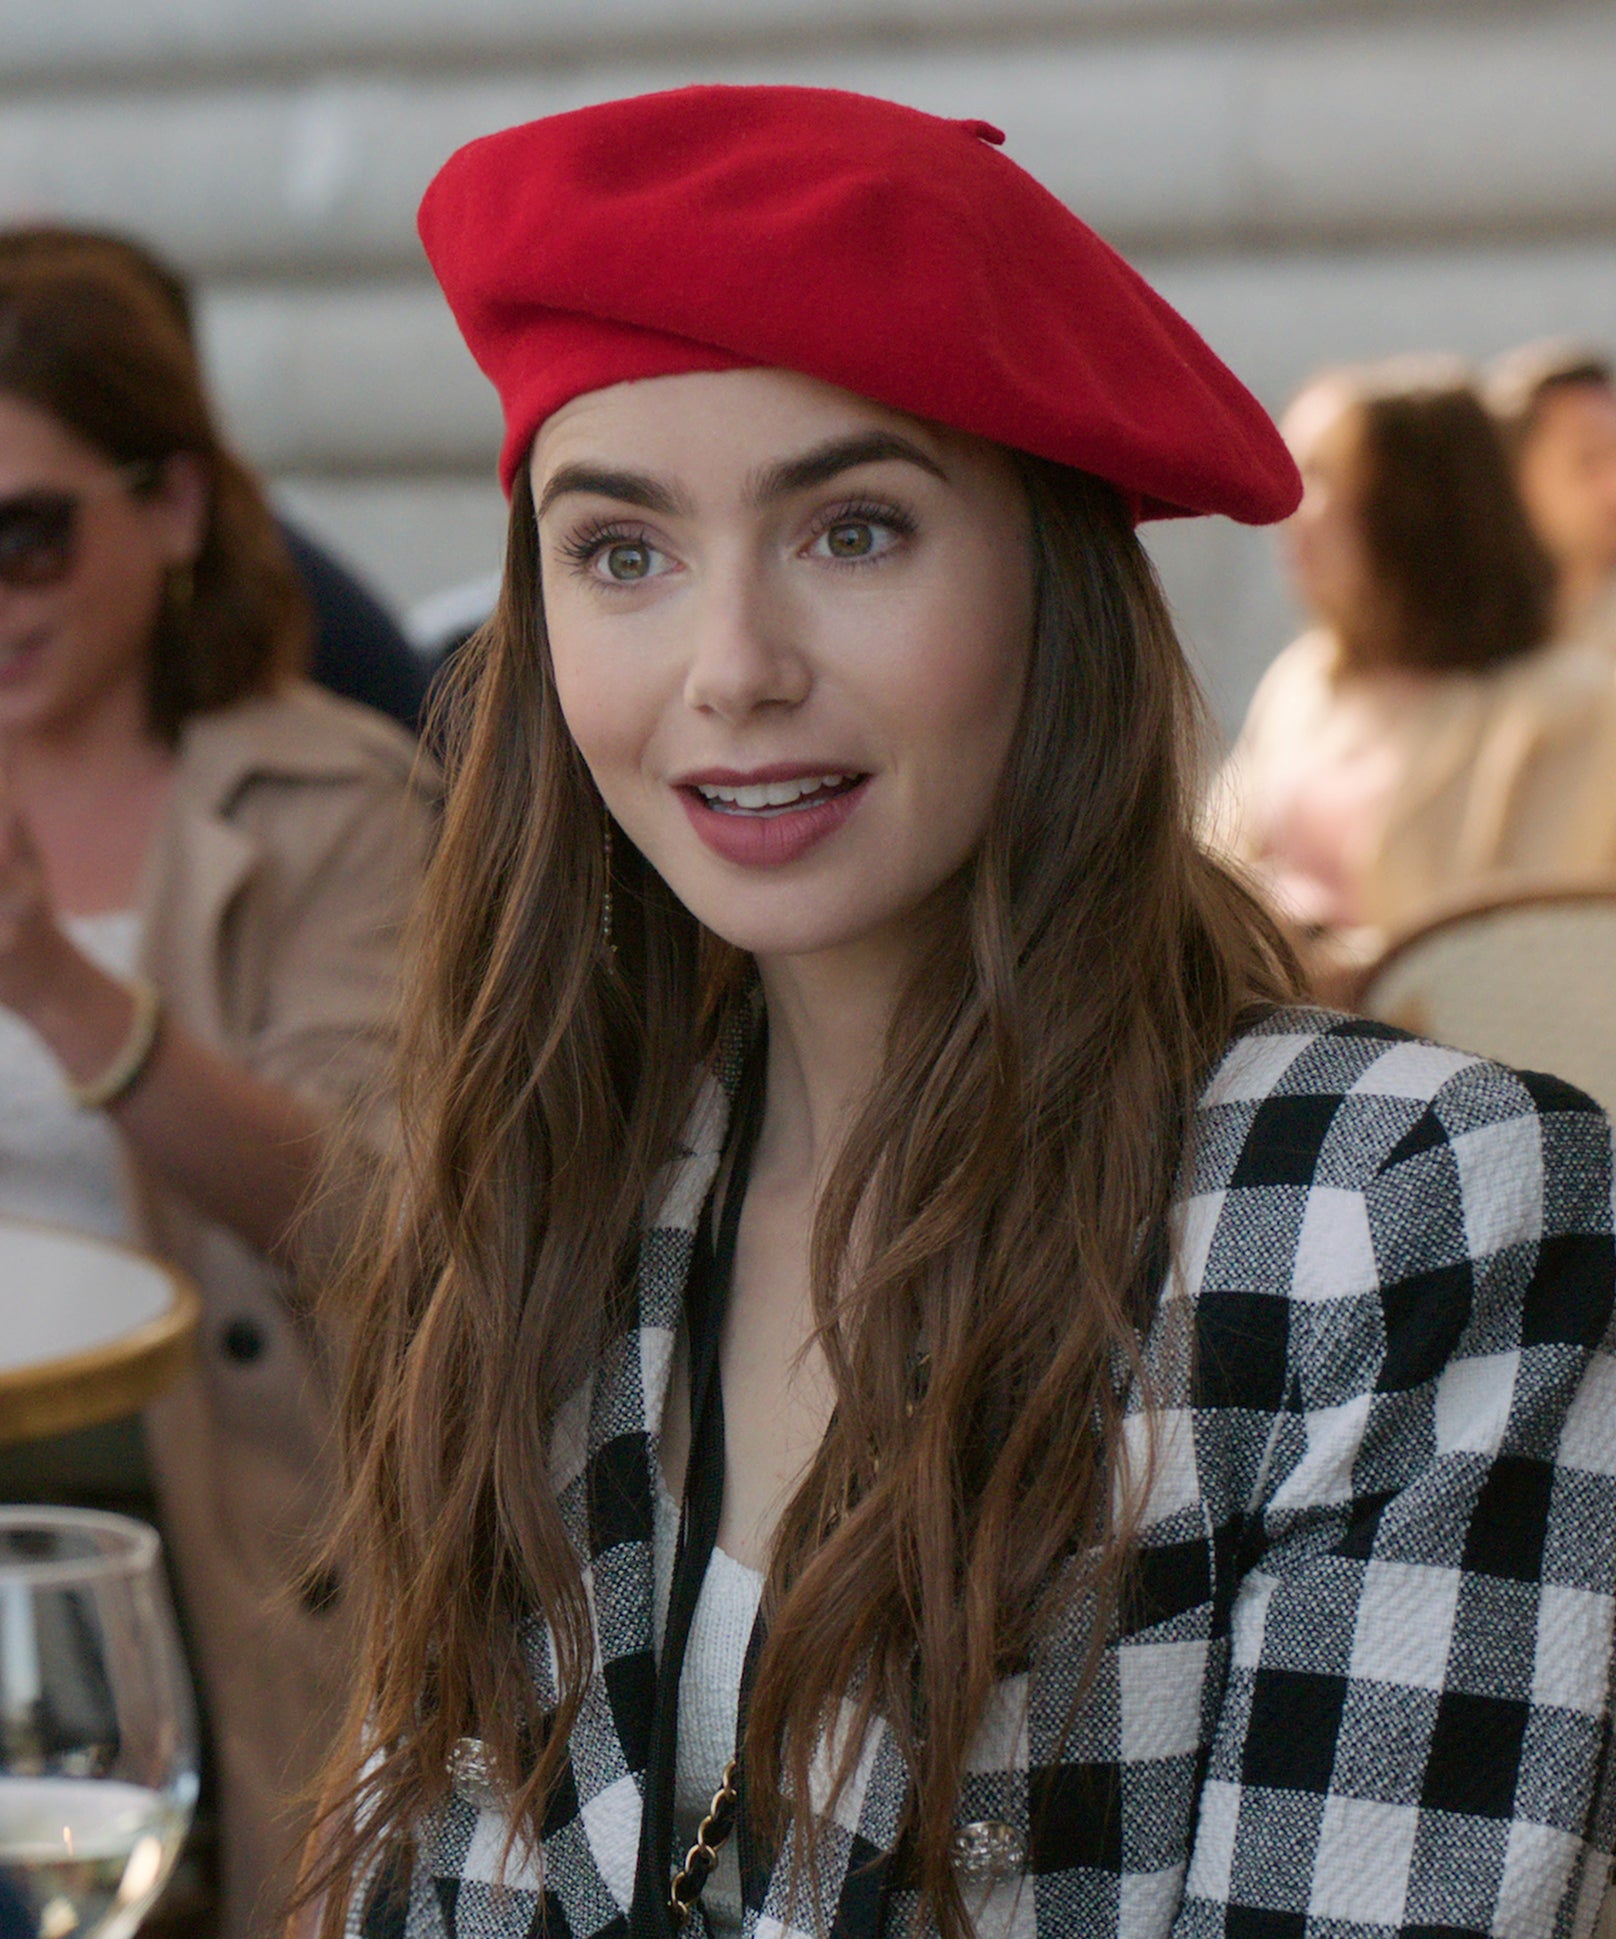 Recreate Lily Collins' Looks From Season 2 of Emily in Paris on